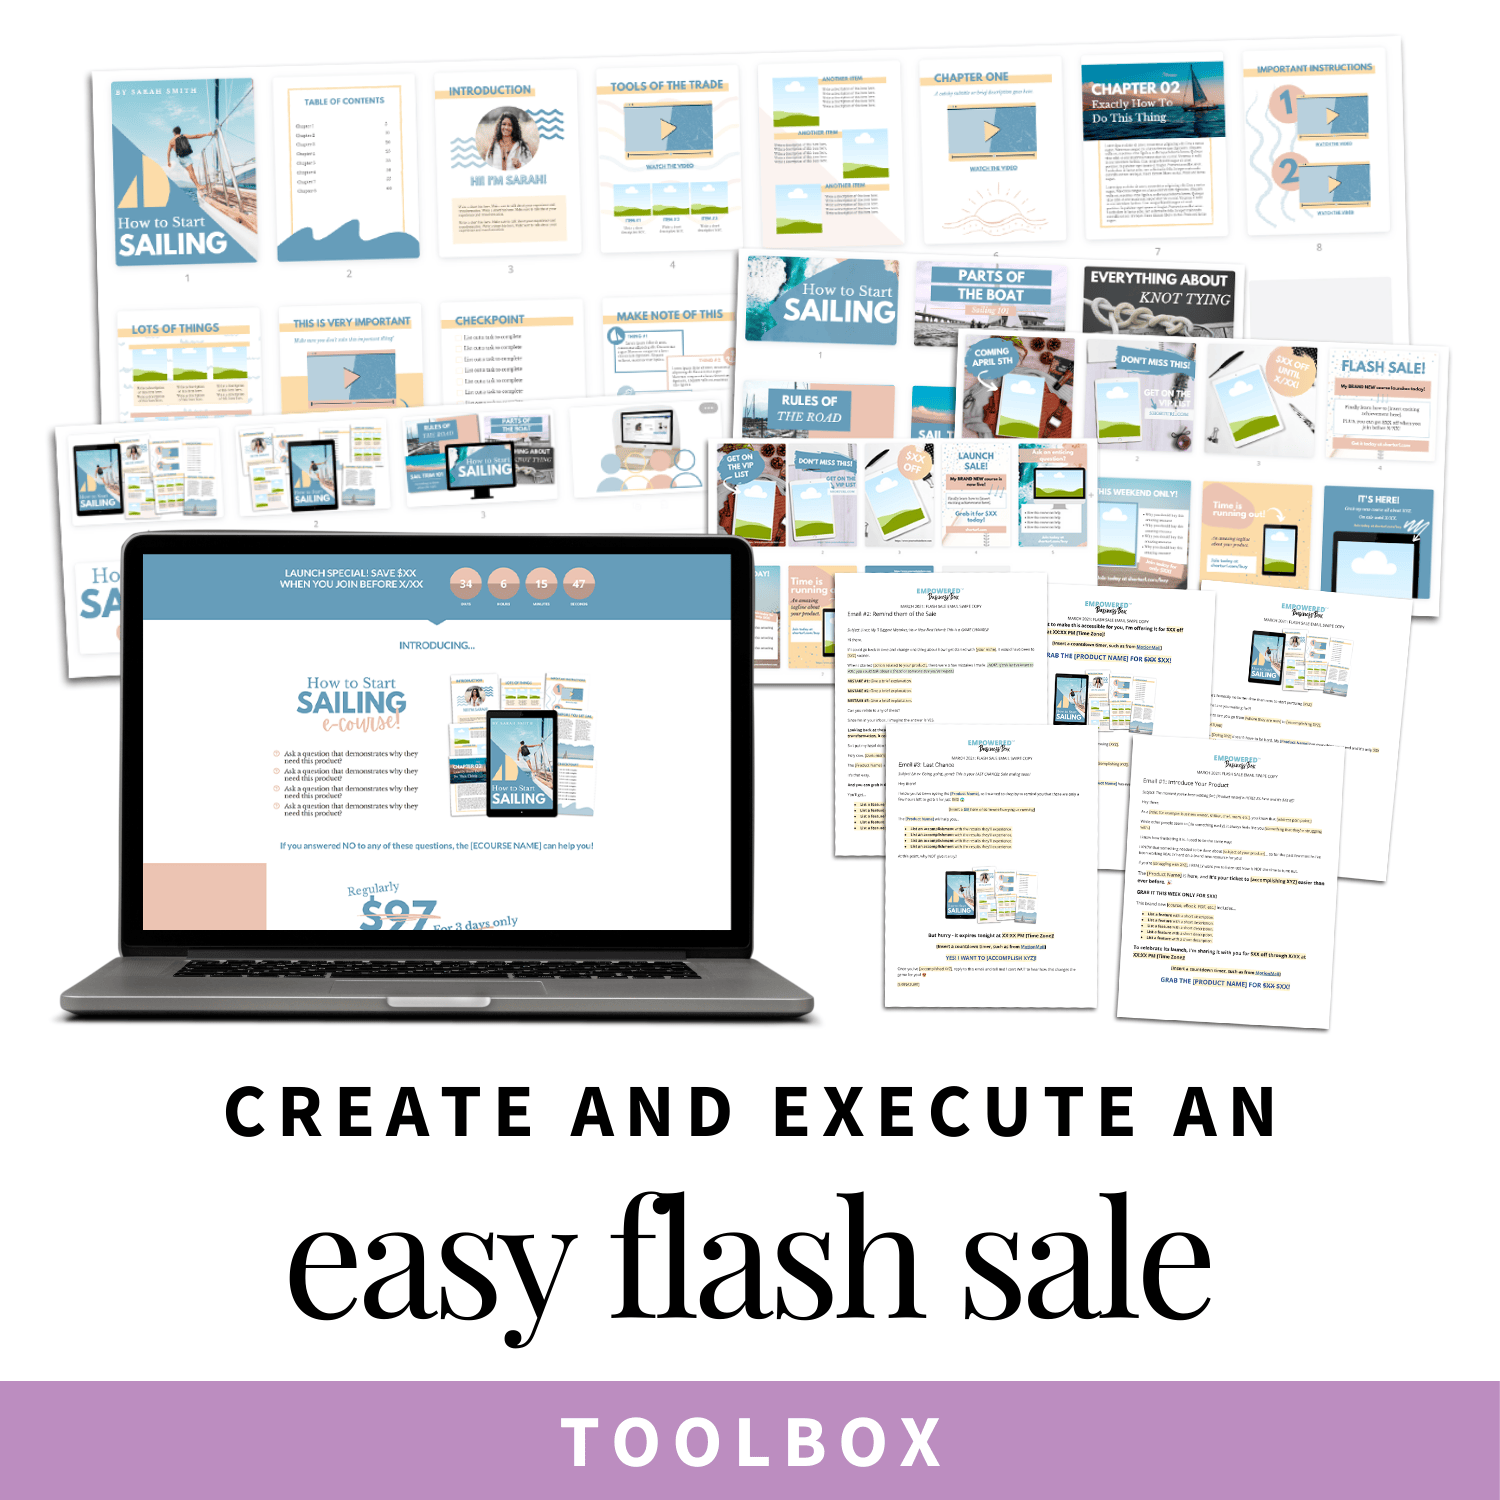 Create and Execute an Easy Flash Sale Toolbox